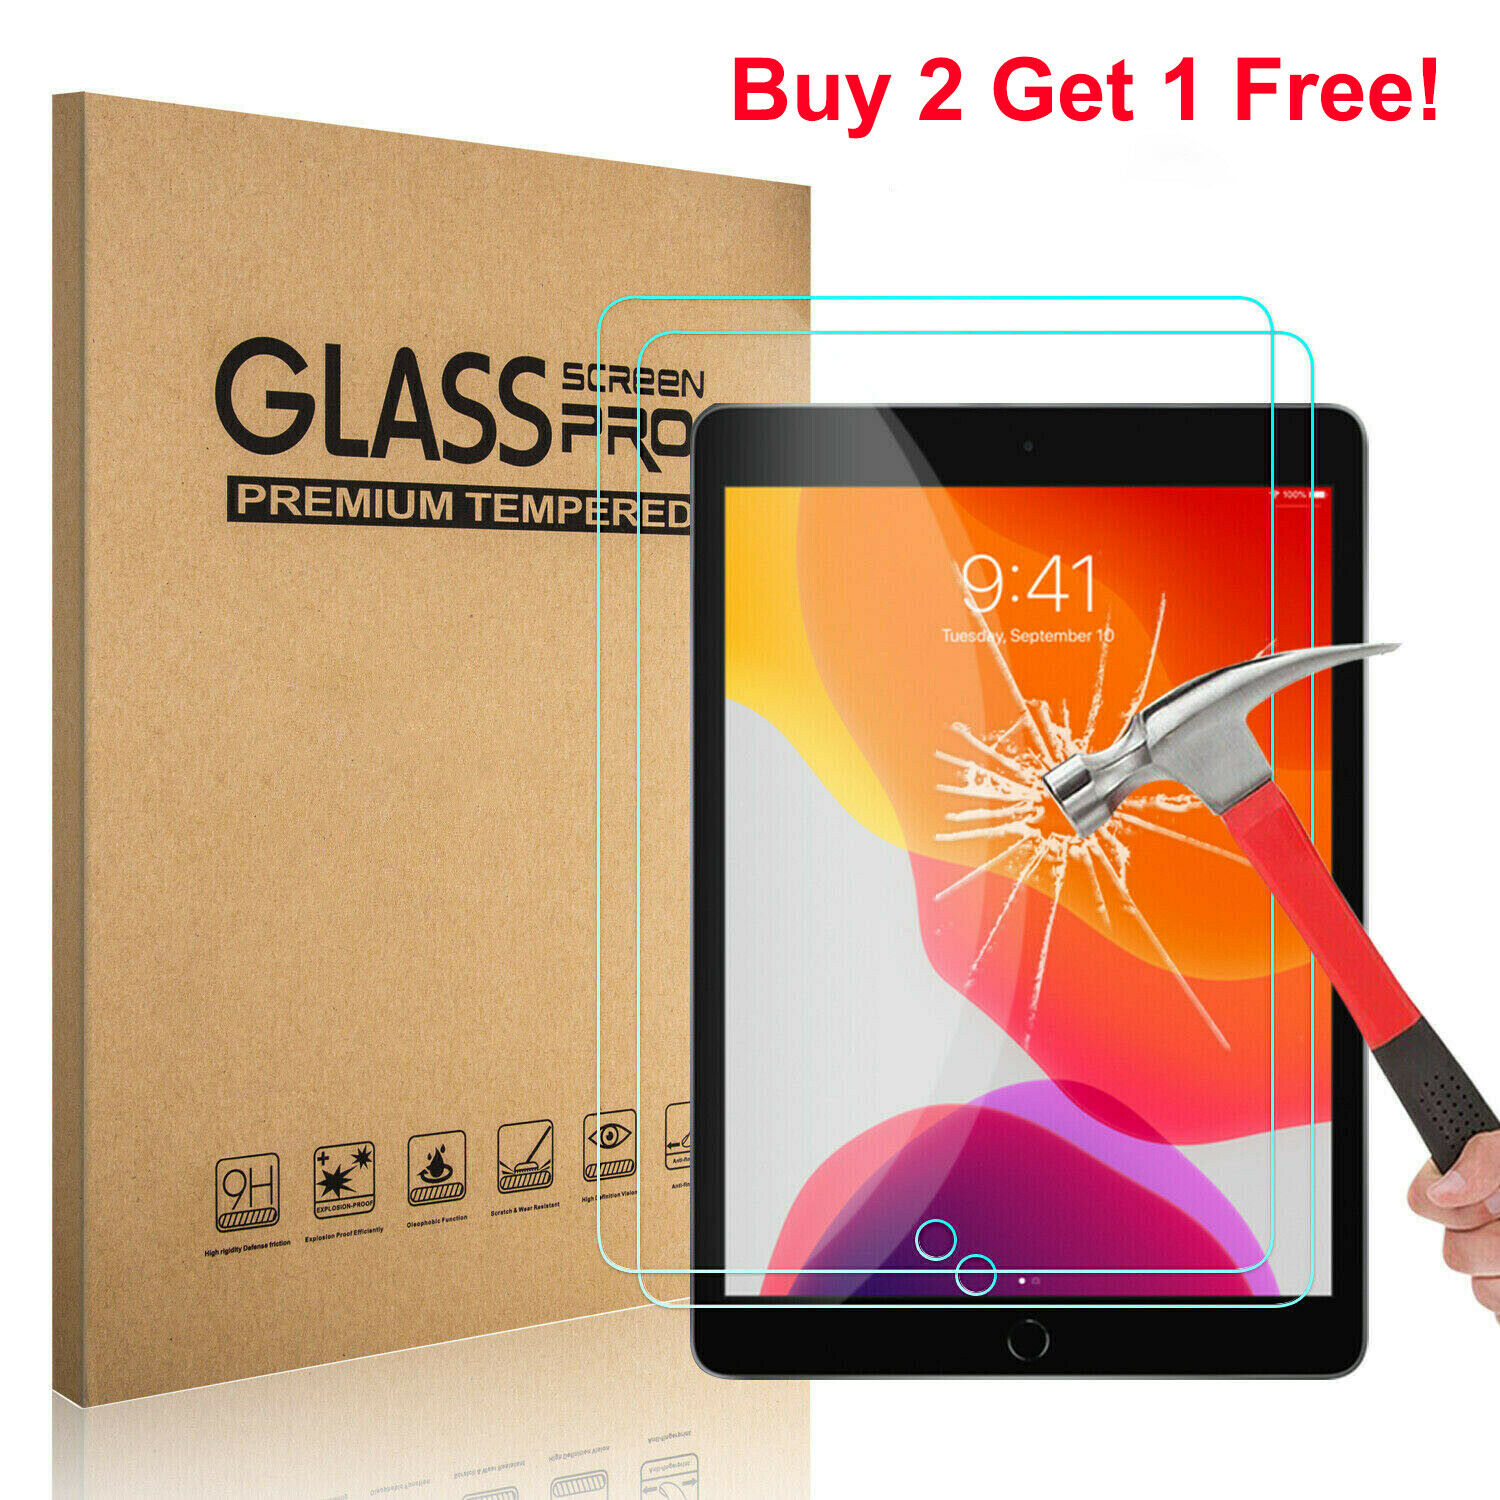 Premium Tempered Glass Screen Protector For Apple Ipad 8th Generation 2020 10.2